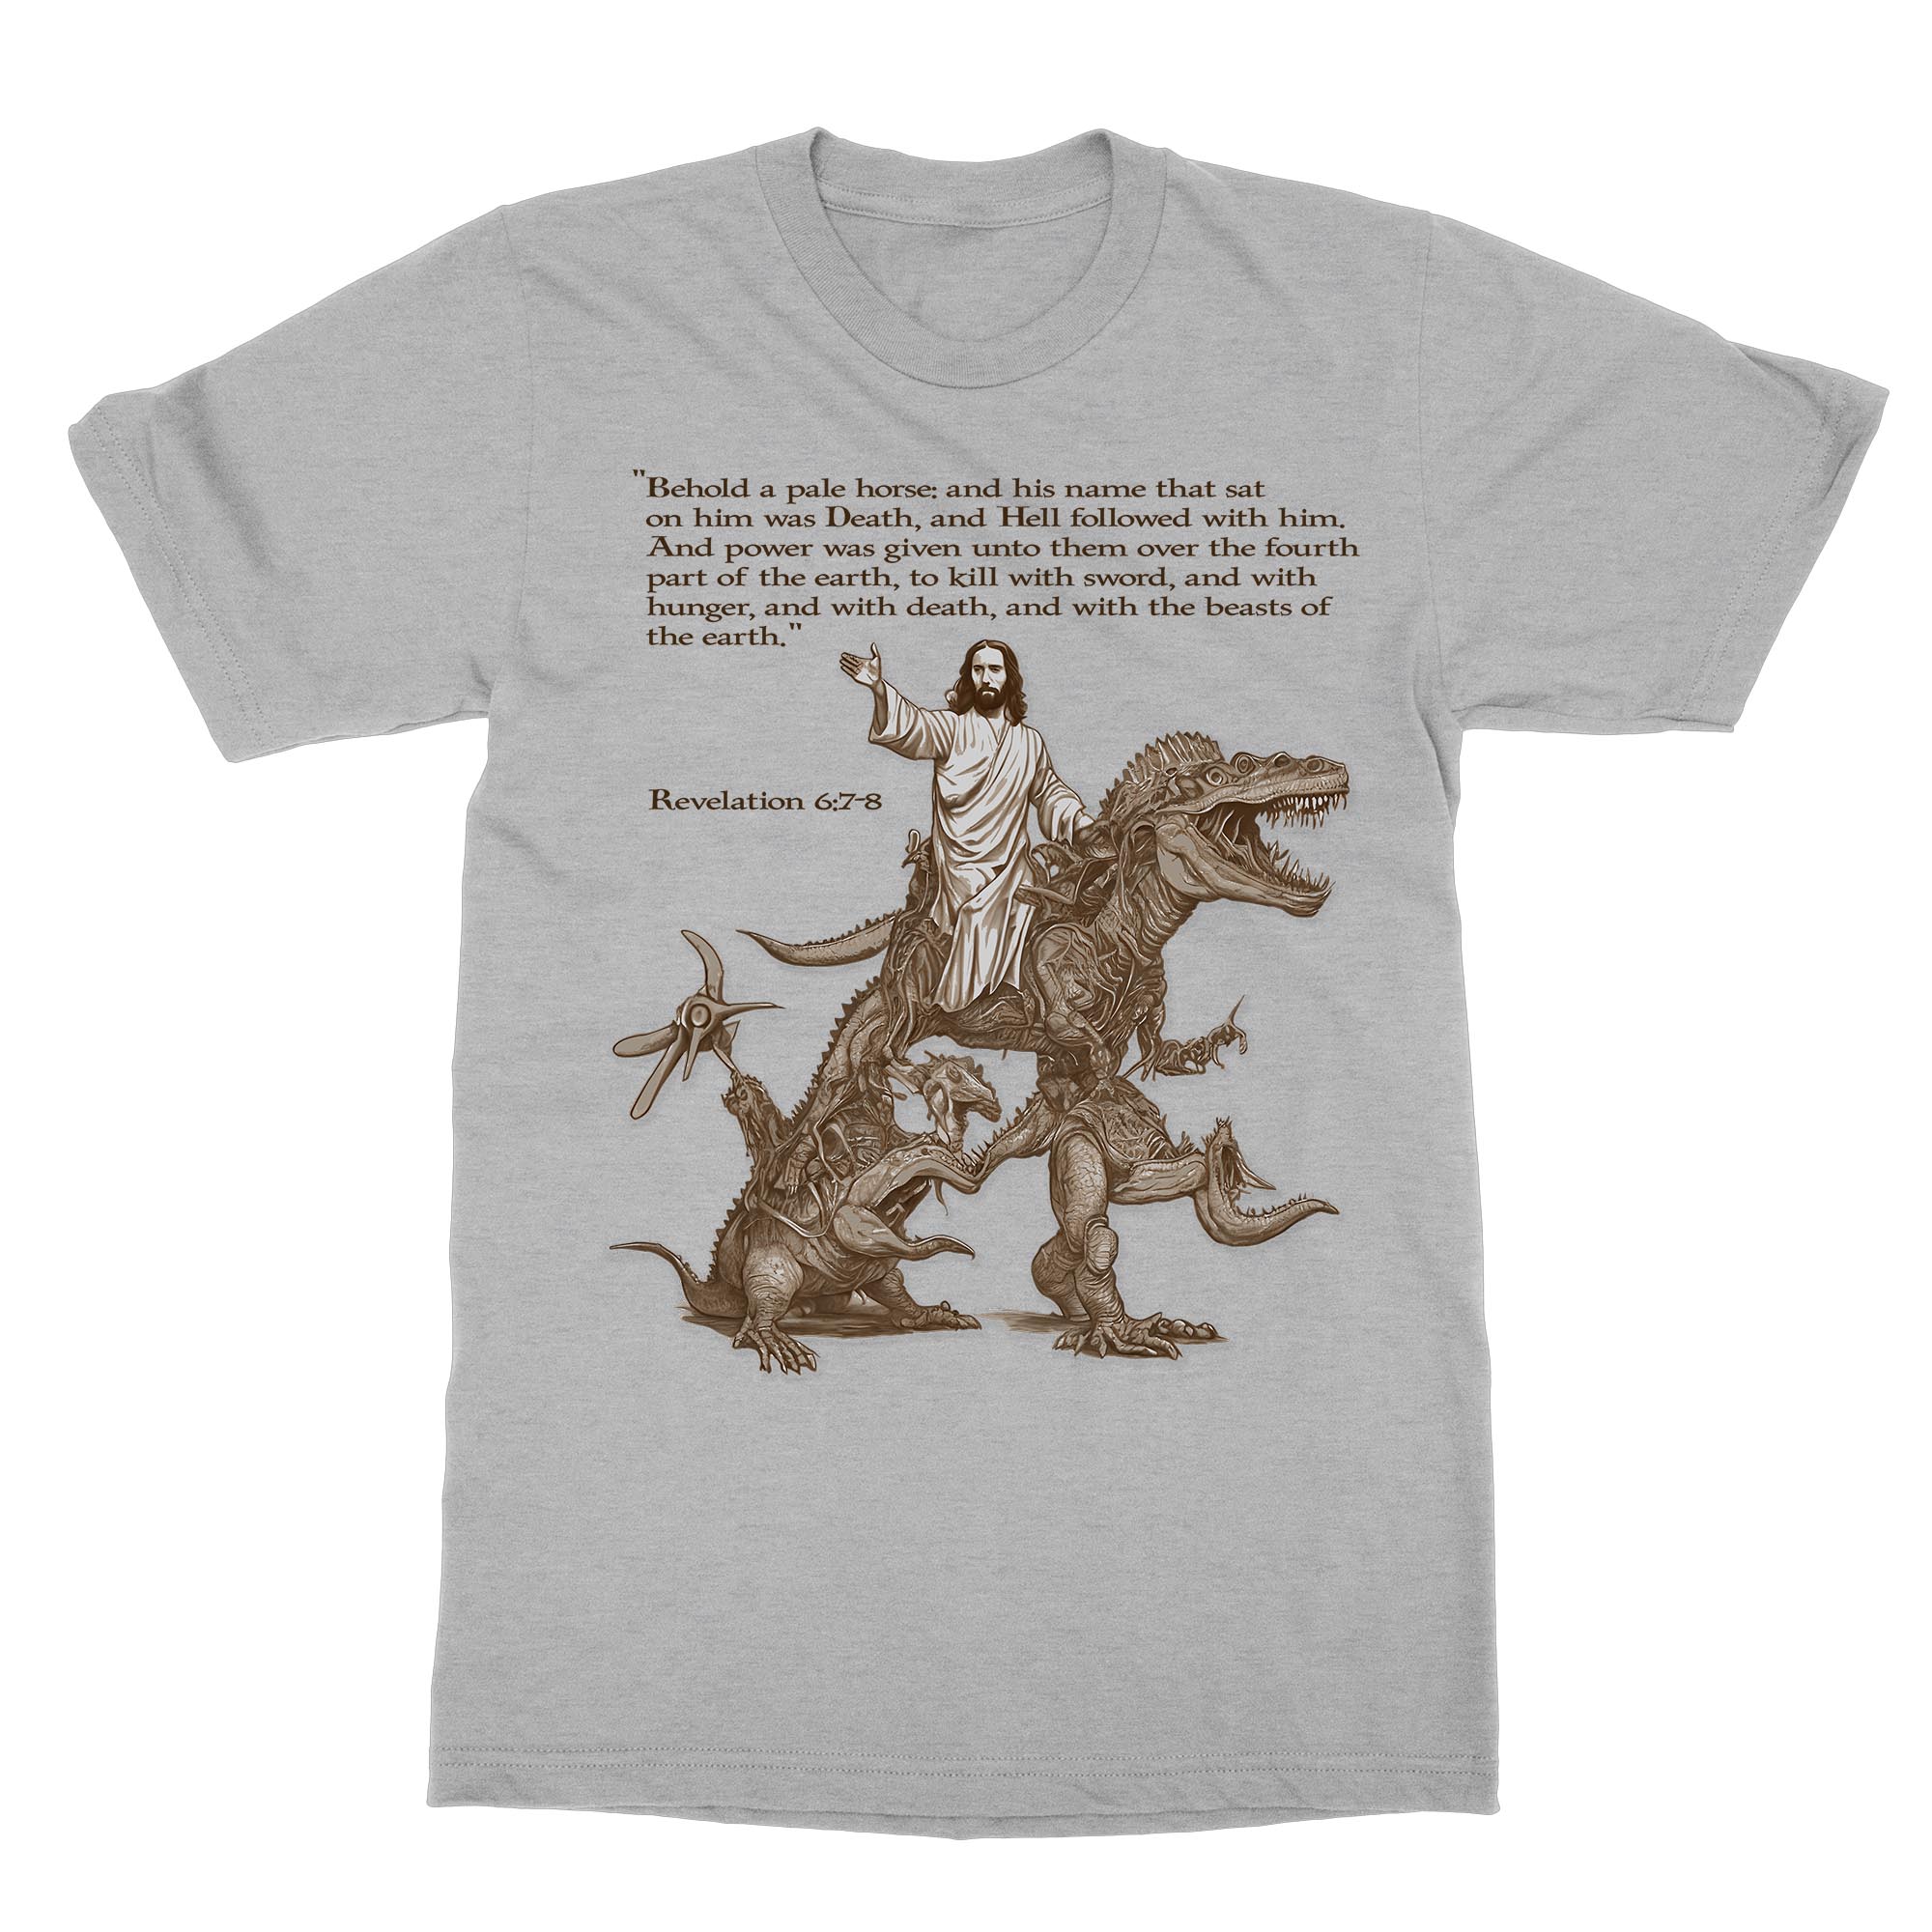 T-Shirts XS / Athletic Heather Armageddon: Wrathful Jesus Returns with His Alien Army, The Second Coming, Apocalypse Graphic Art T-Shirt